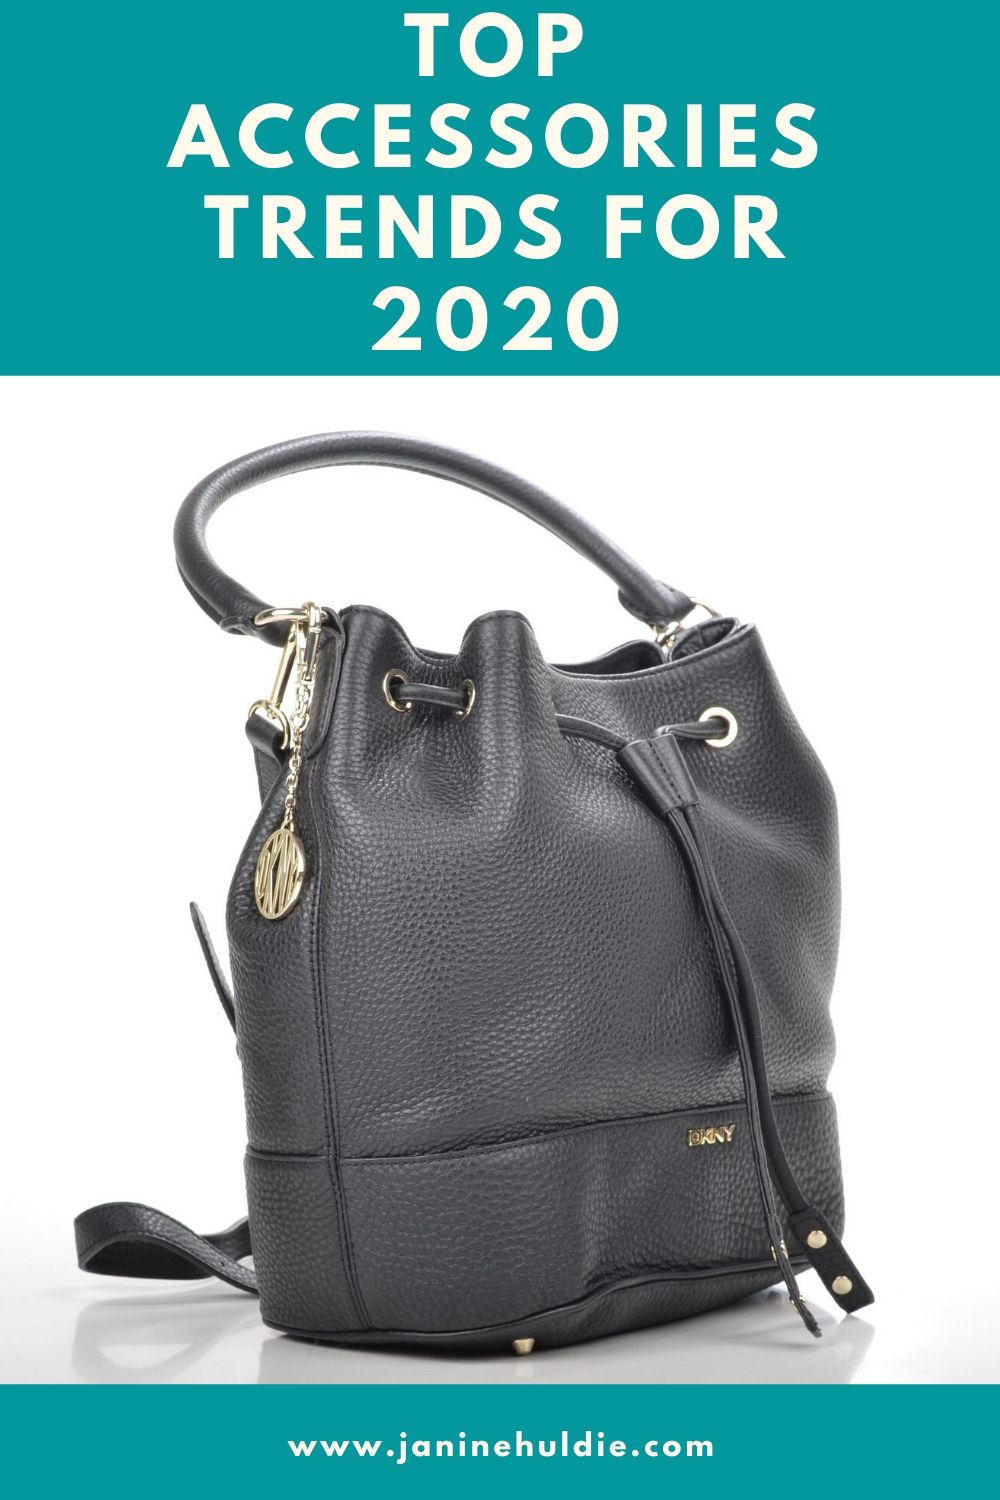 Top Accessories Trends for 2020